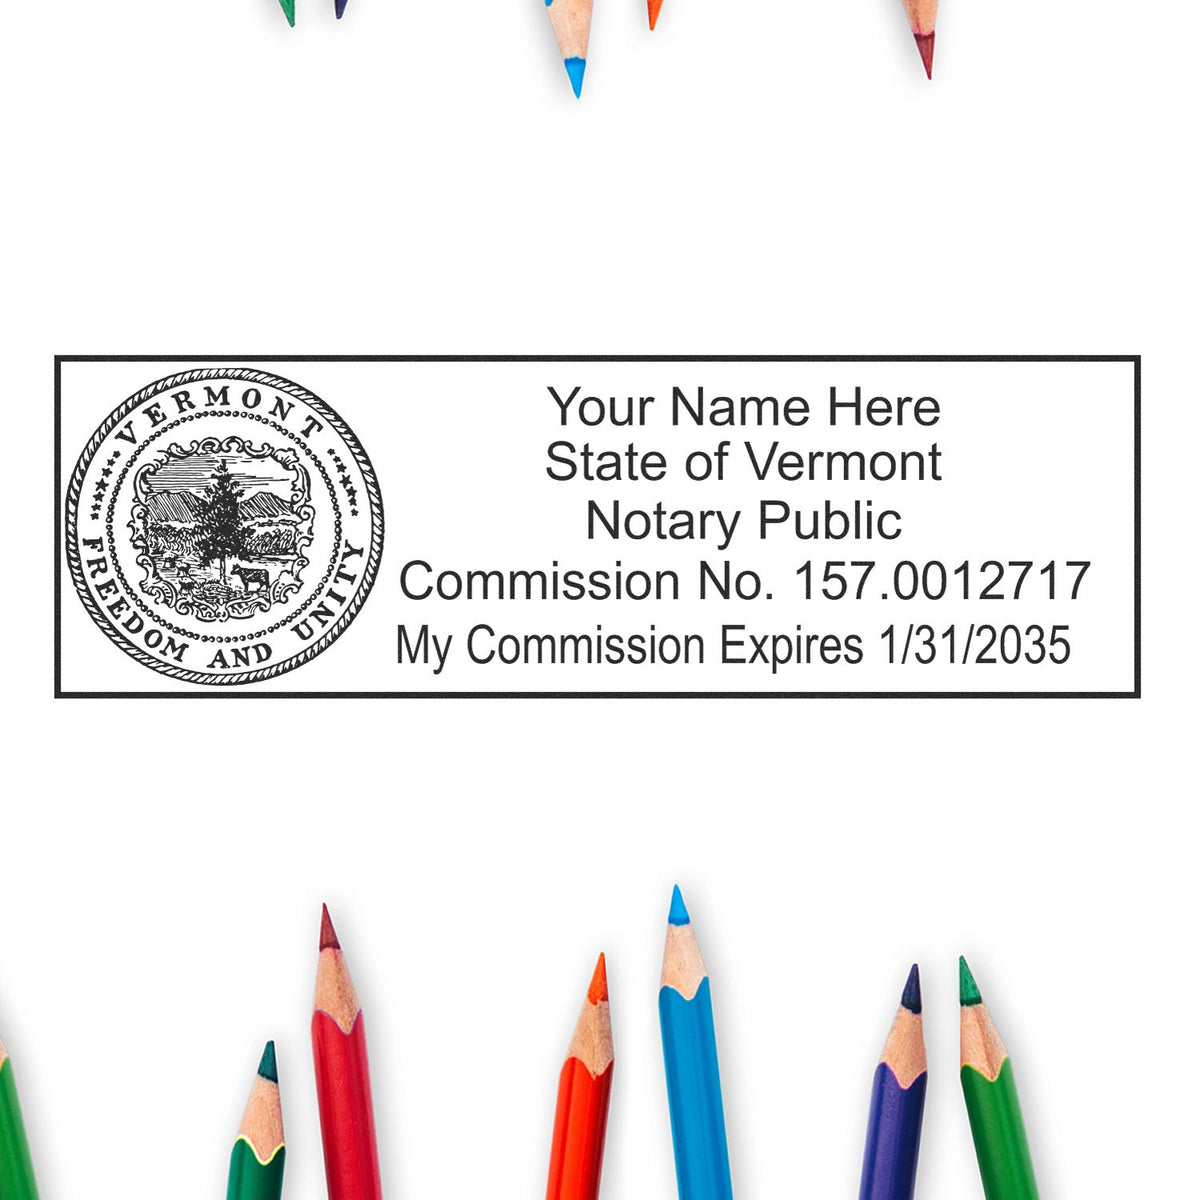 A lifestyle photo showing a stamped image of the Heavy-Duty Vermont Rectangular Notary Stamp on a piece of paper